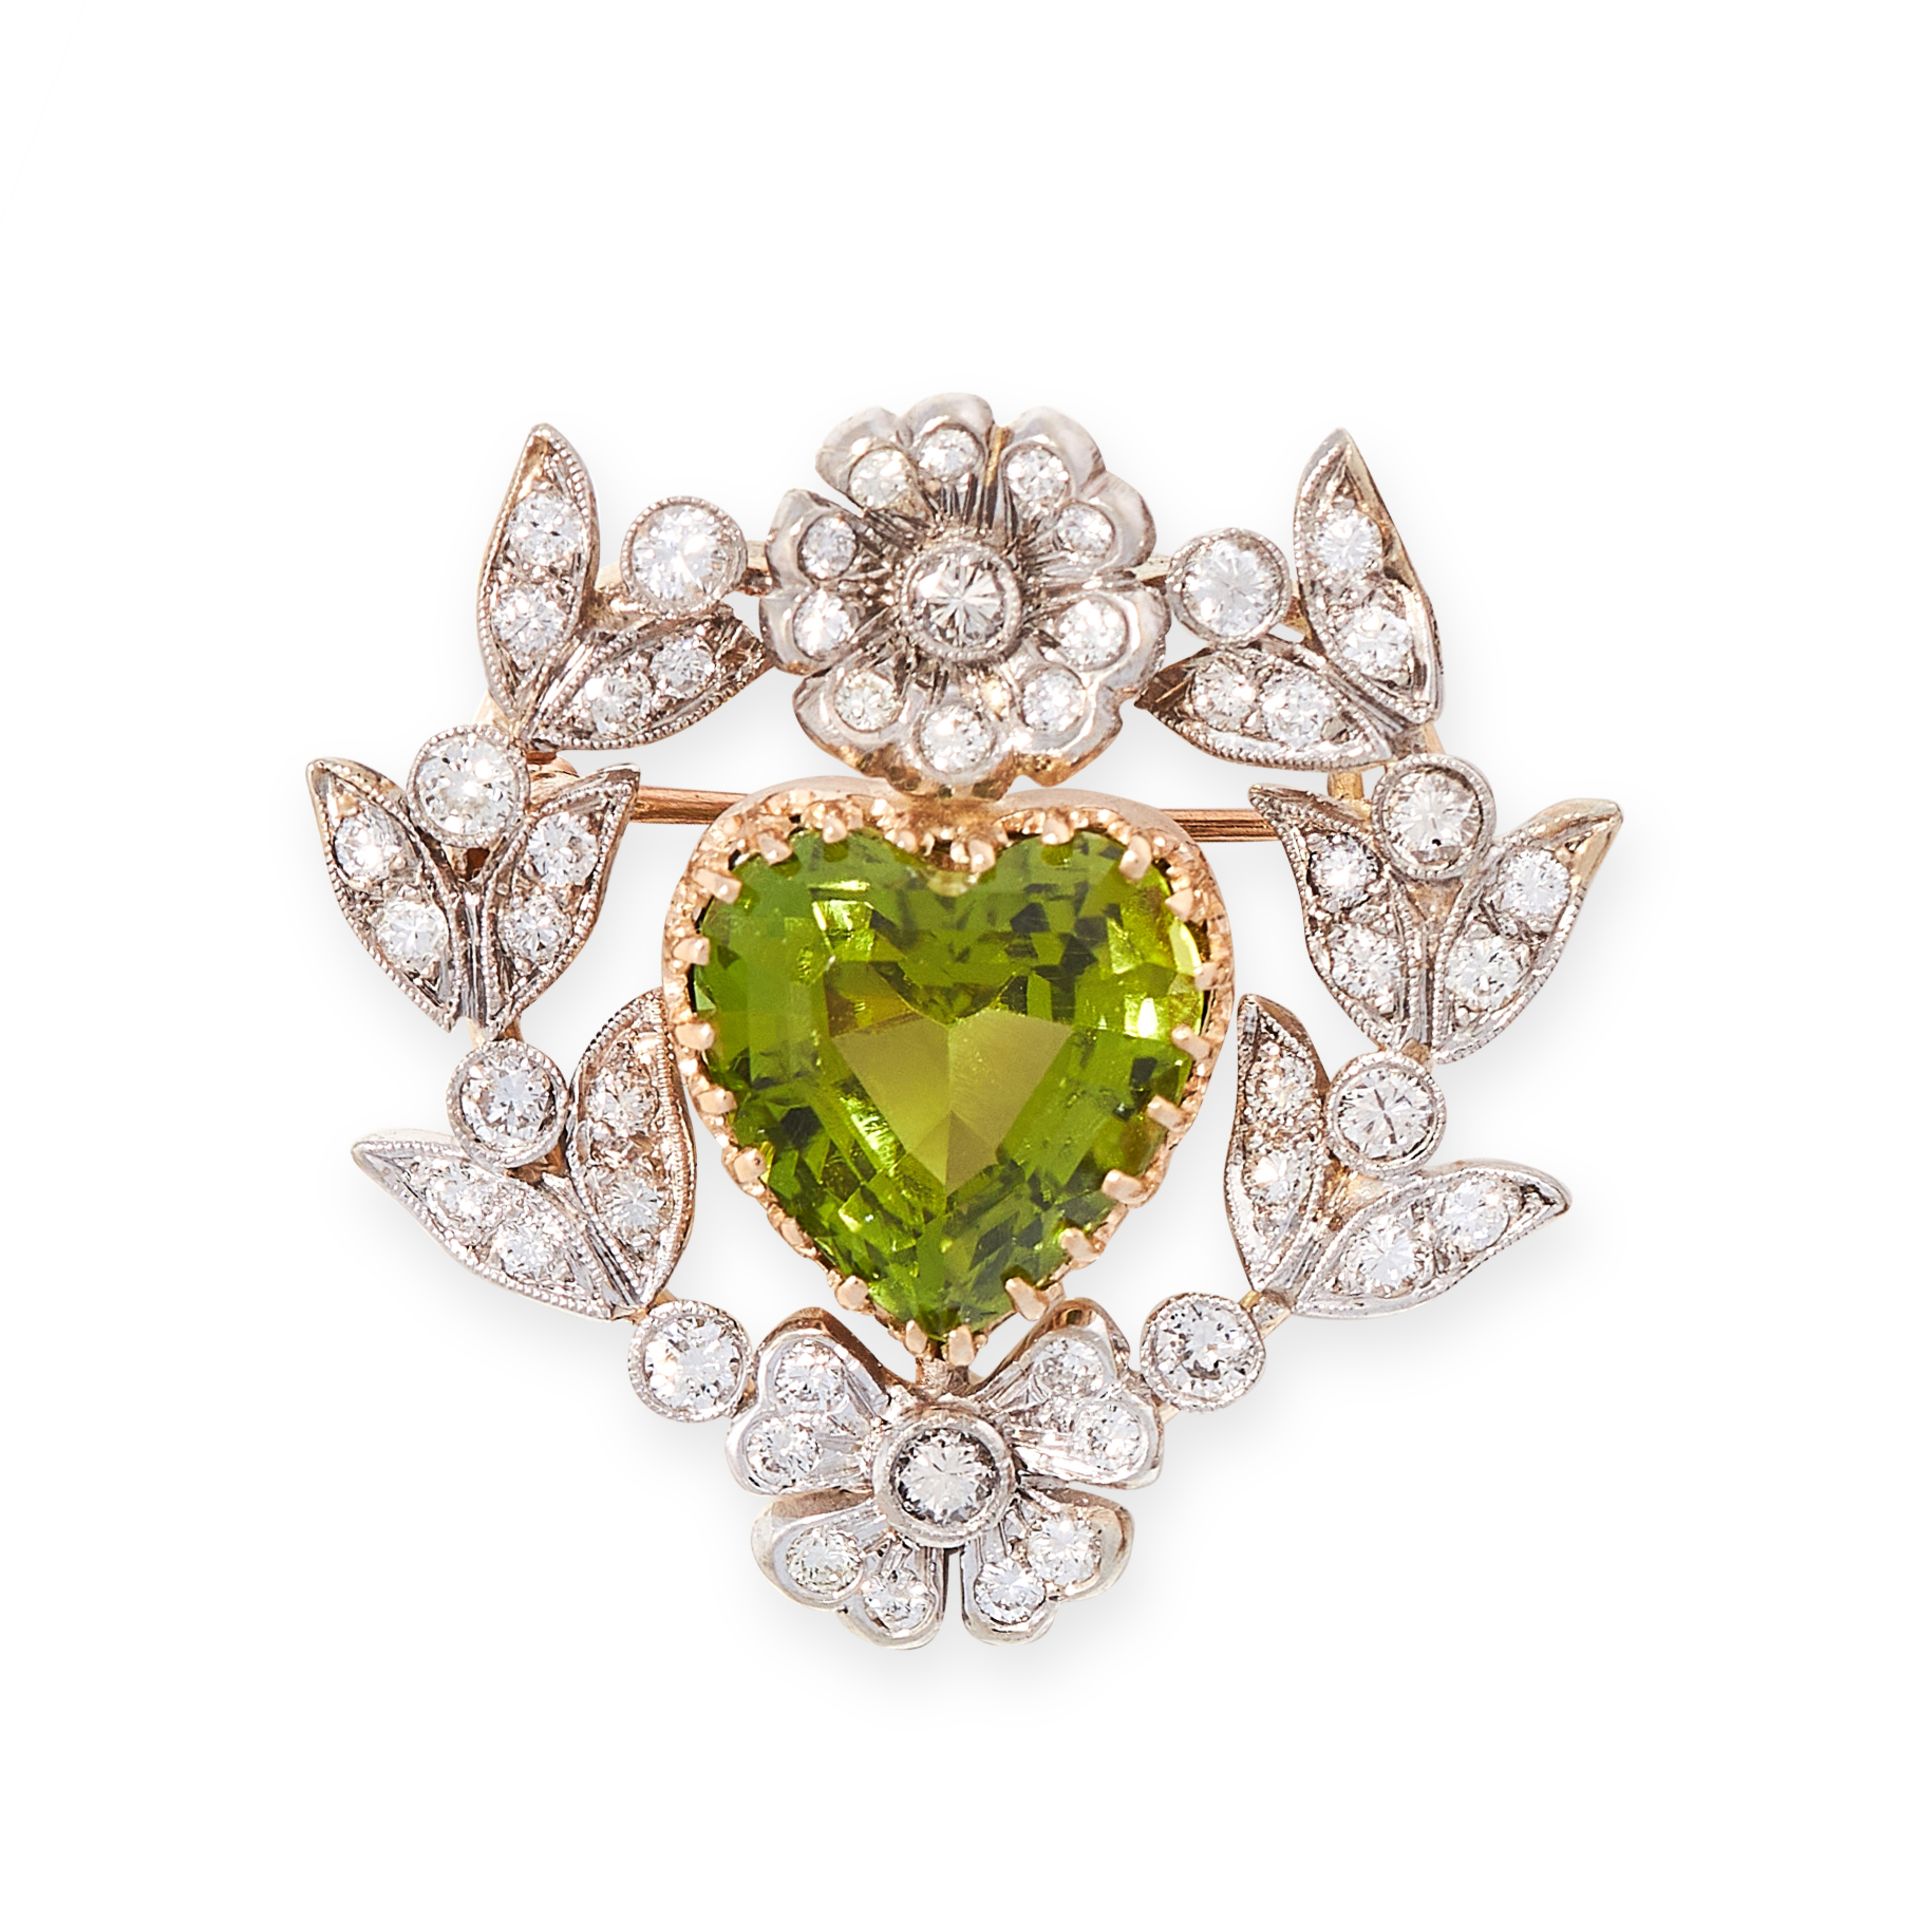 A PERIDOT AND DIAMOND PENDANT / BROOCH in yellow gold and silver, set with a heart shaped peridot of